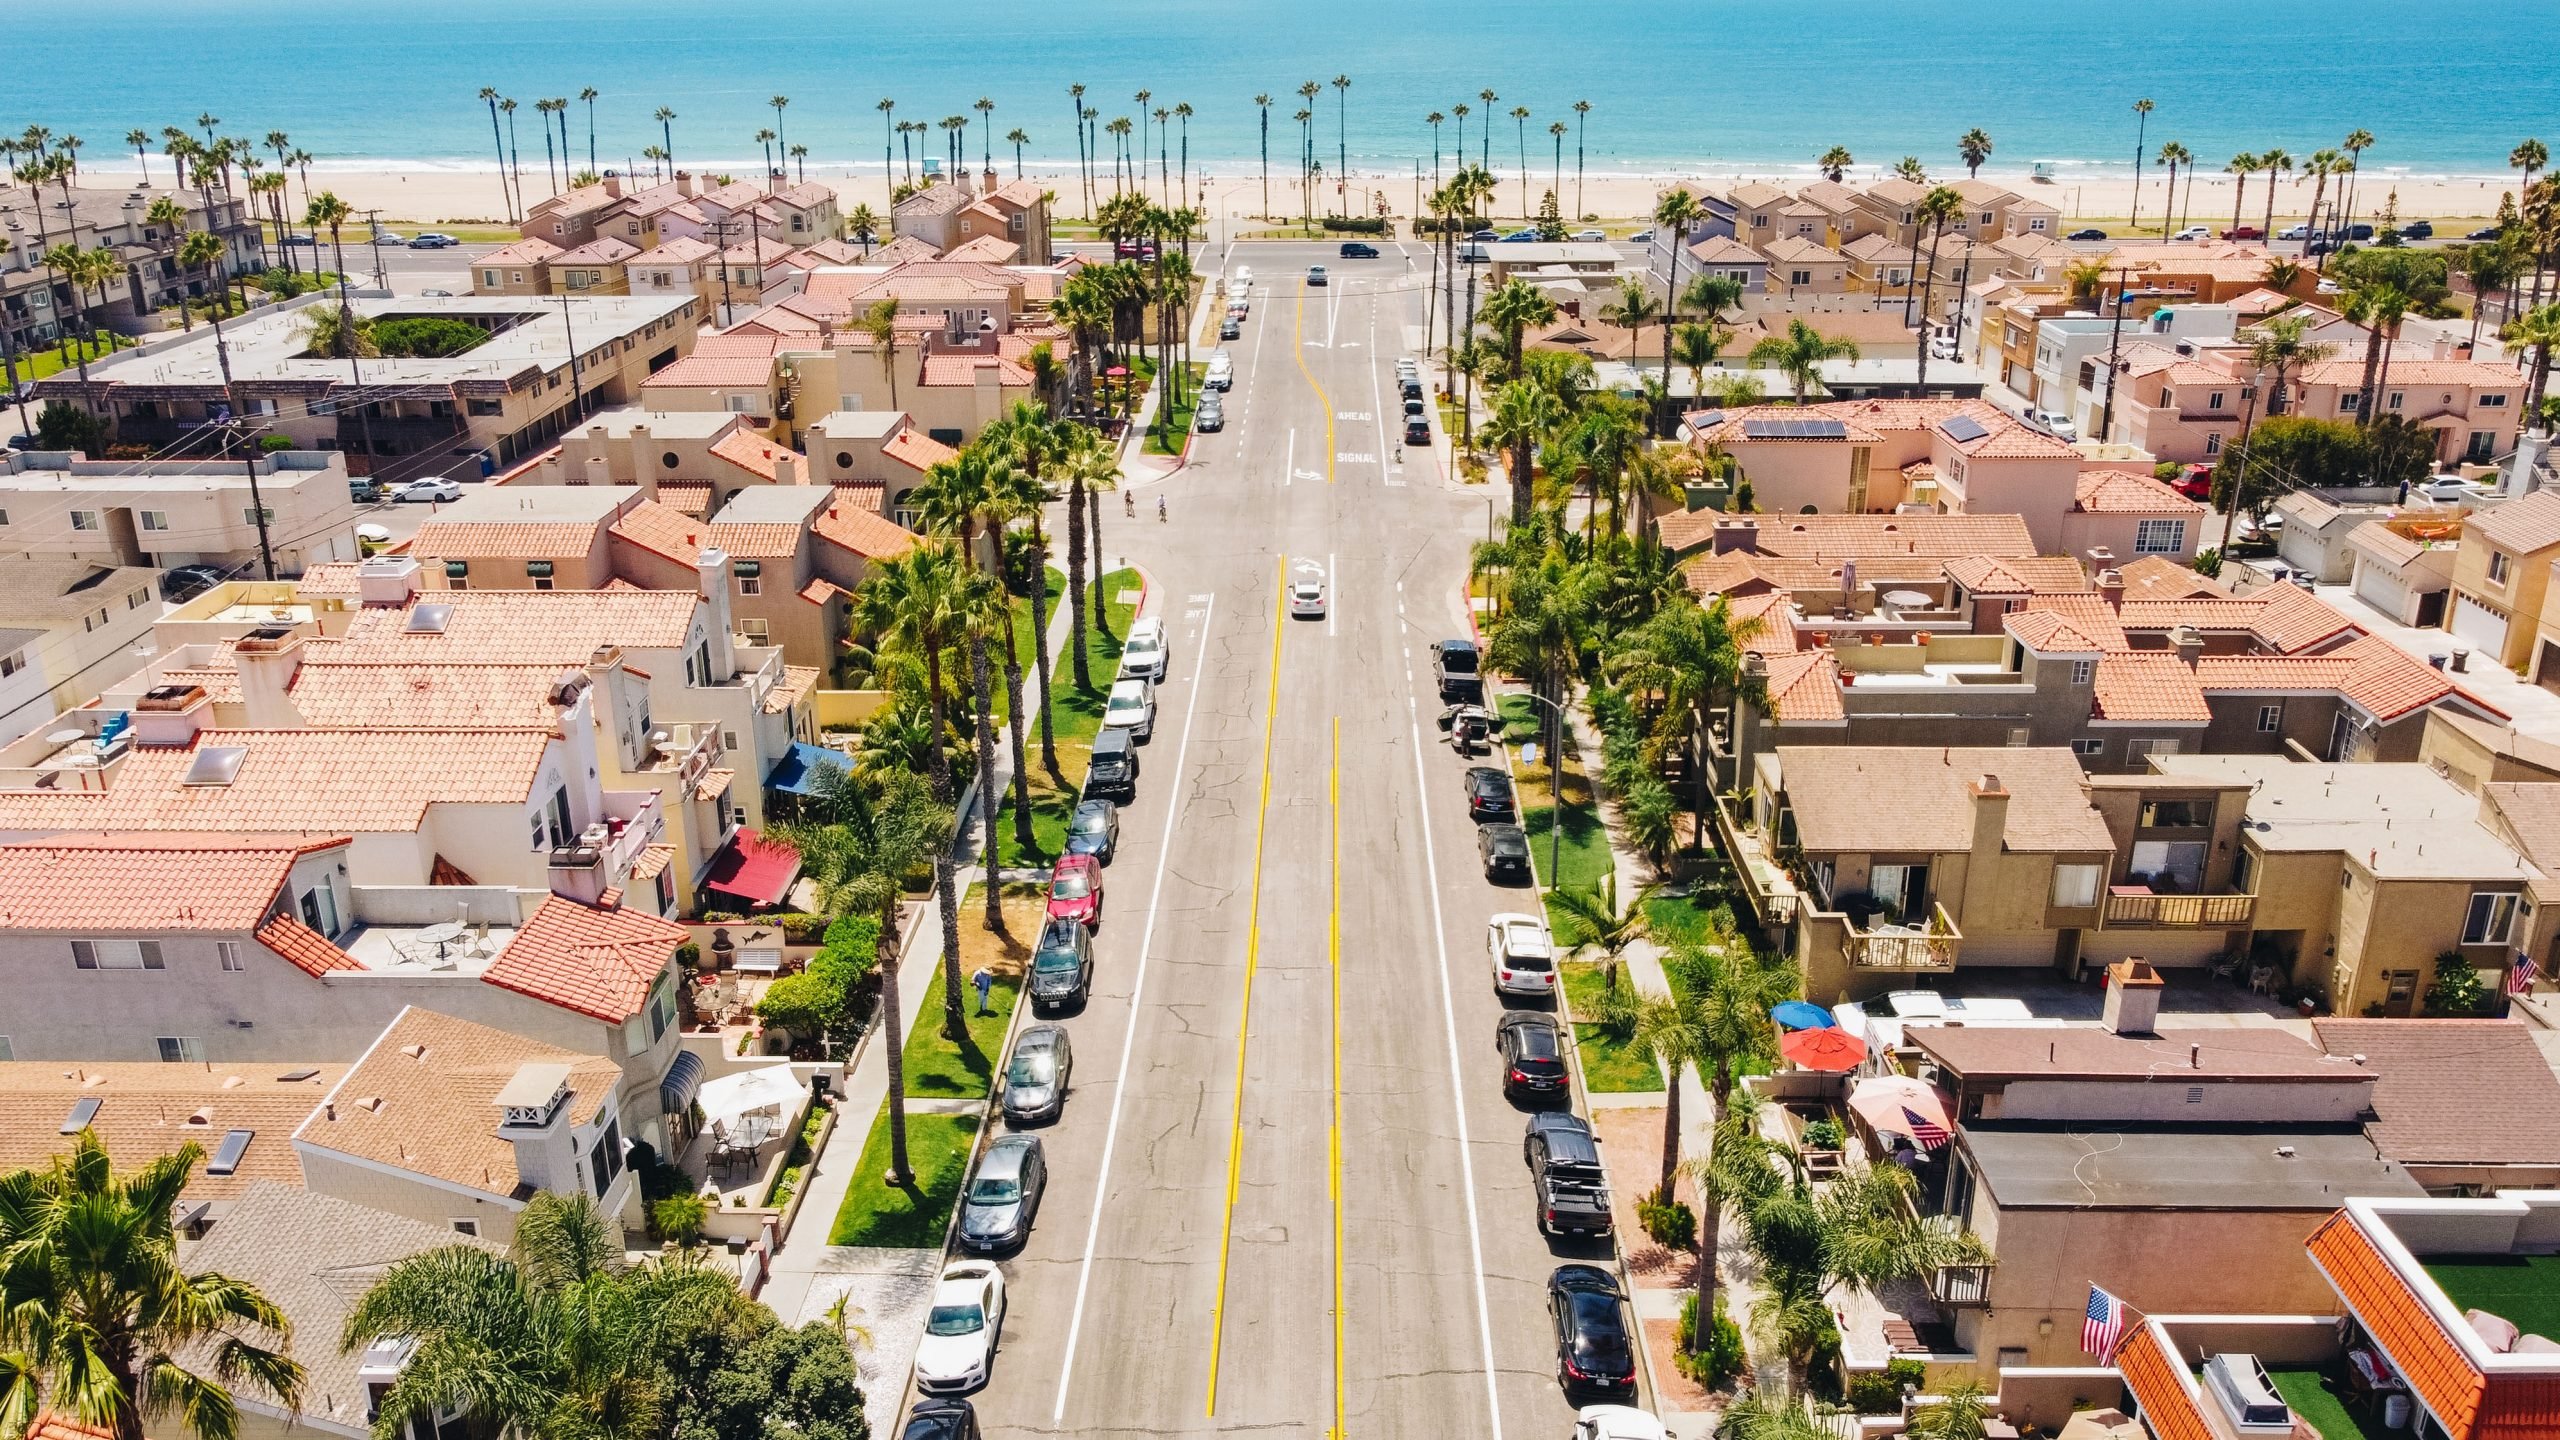 How To Get From Los Angeles Airport To Huntington Beach - All Possible Ways, cheapest way from Los Angeles airport to Huntington Beach, Los Angeles airport to Huntington Beach, Los Angeles shuttle Bus Airport, Los Angeles Airport Bus To Huntington Beach, OCTA Buses in Los Angeles